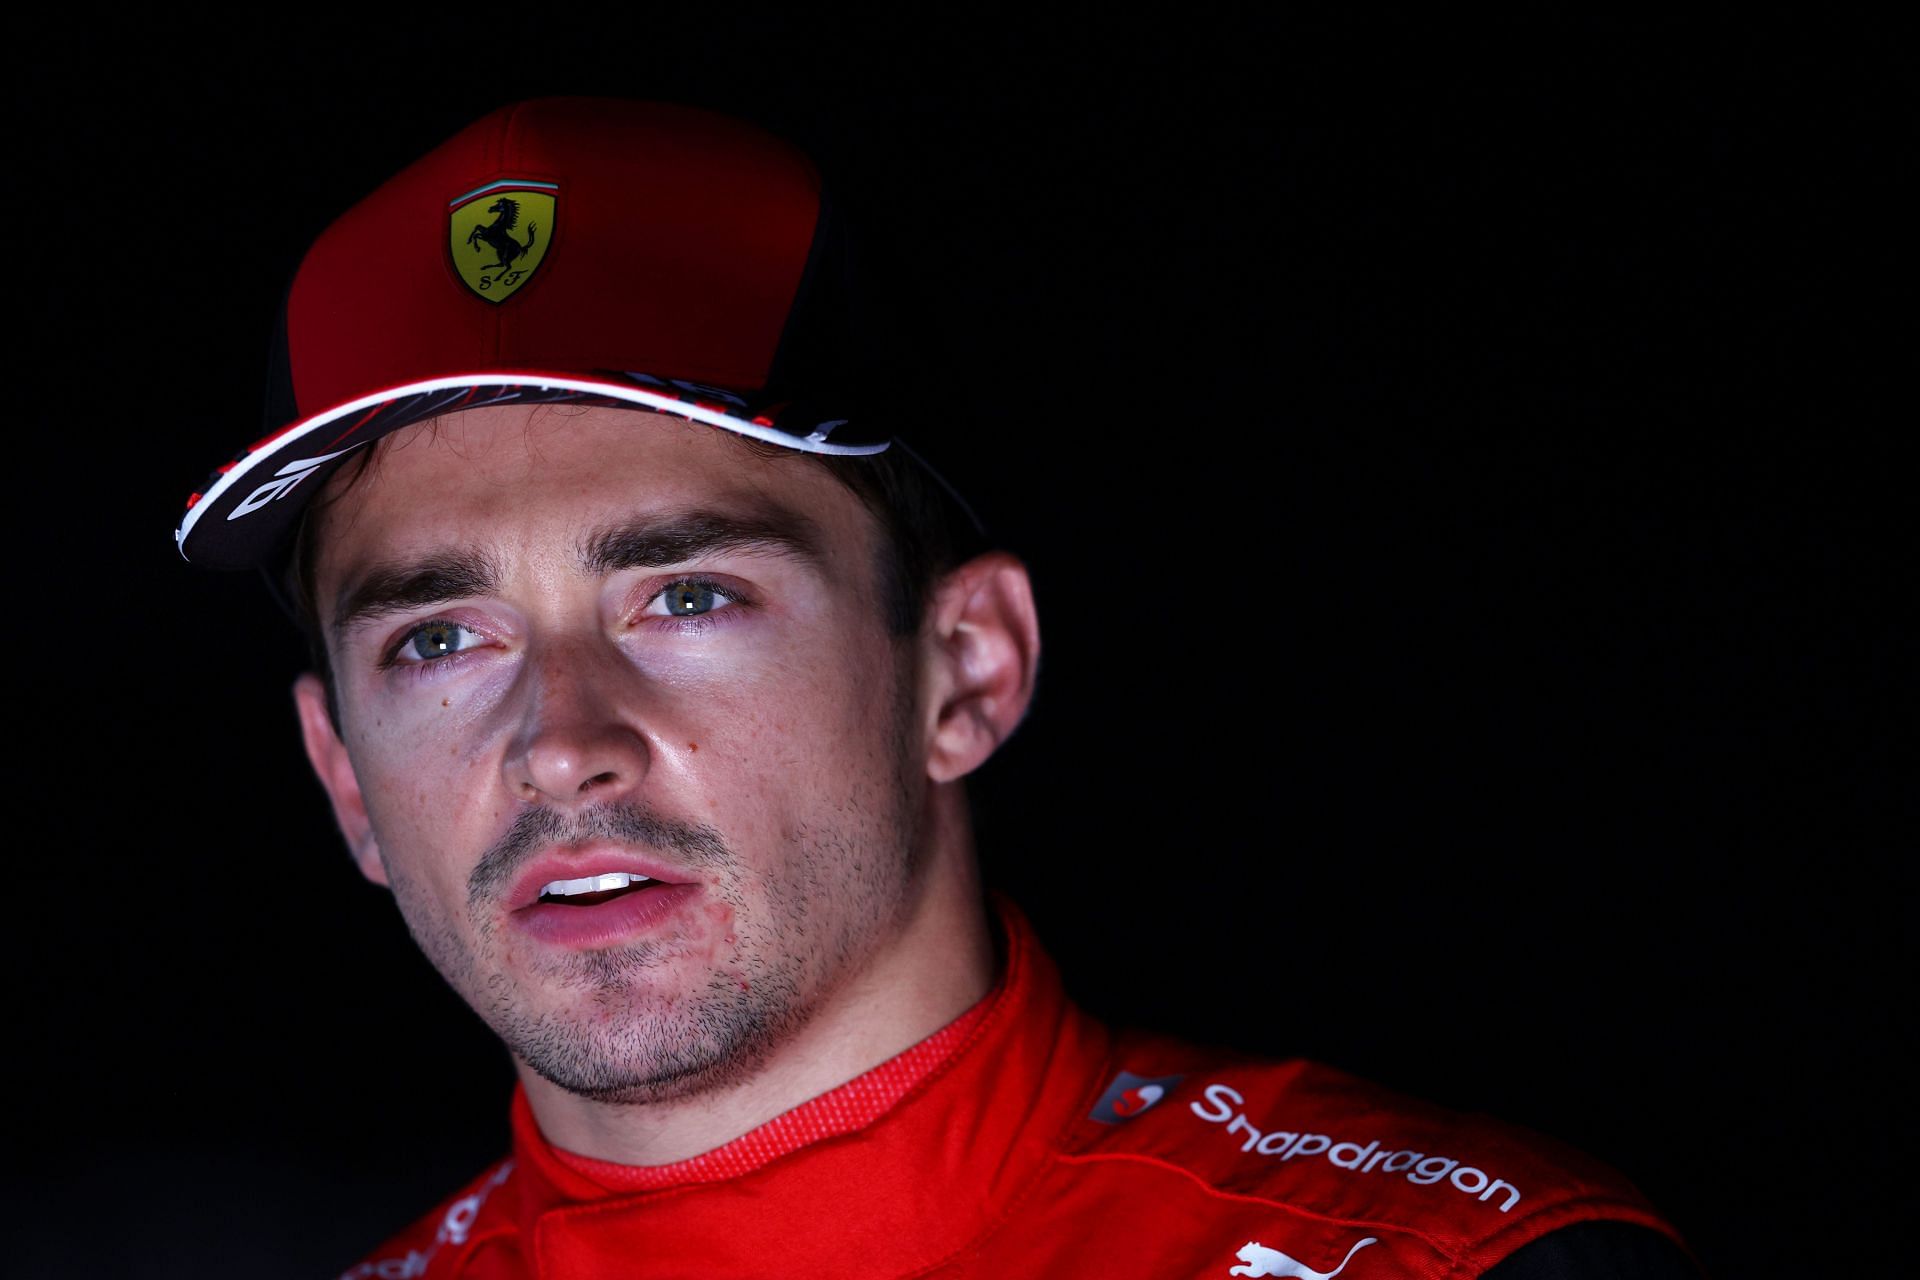 At Baku, Charles Leclerc suffered his second DNF in three races